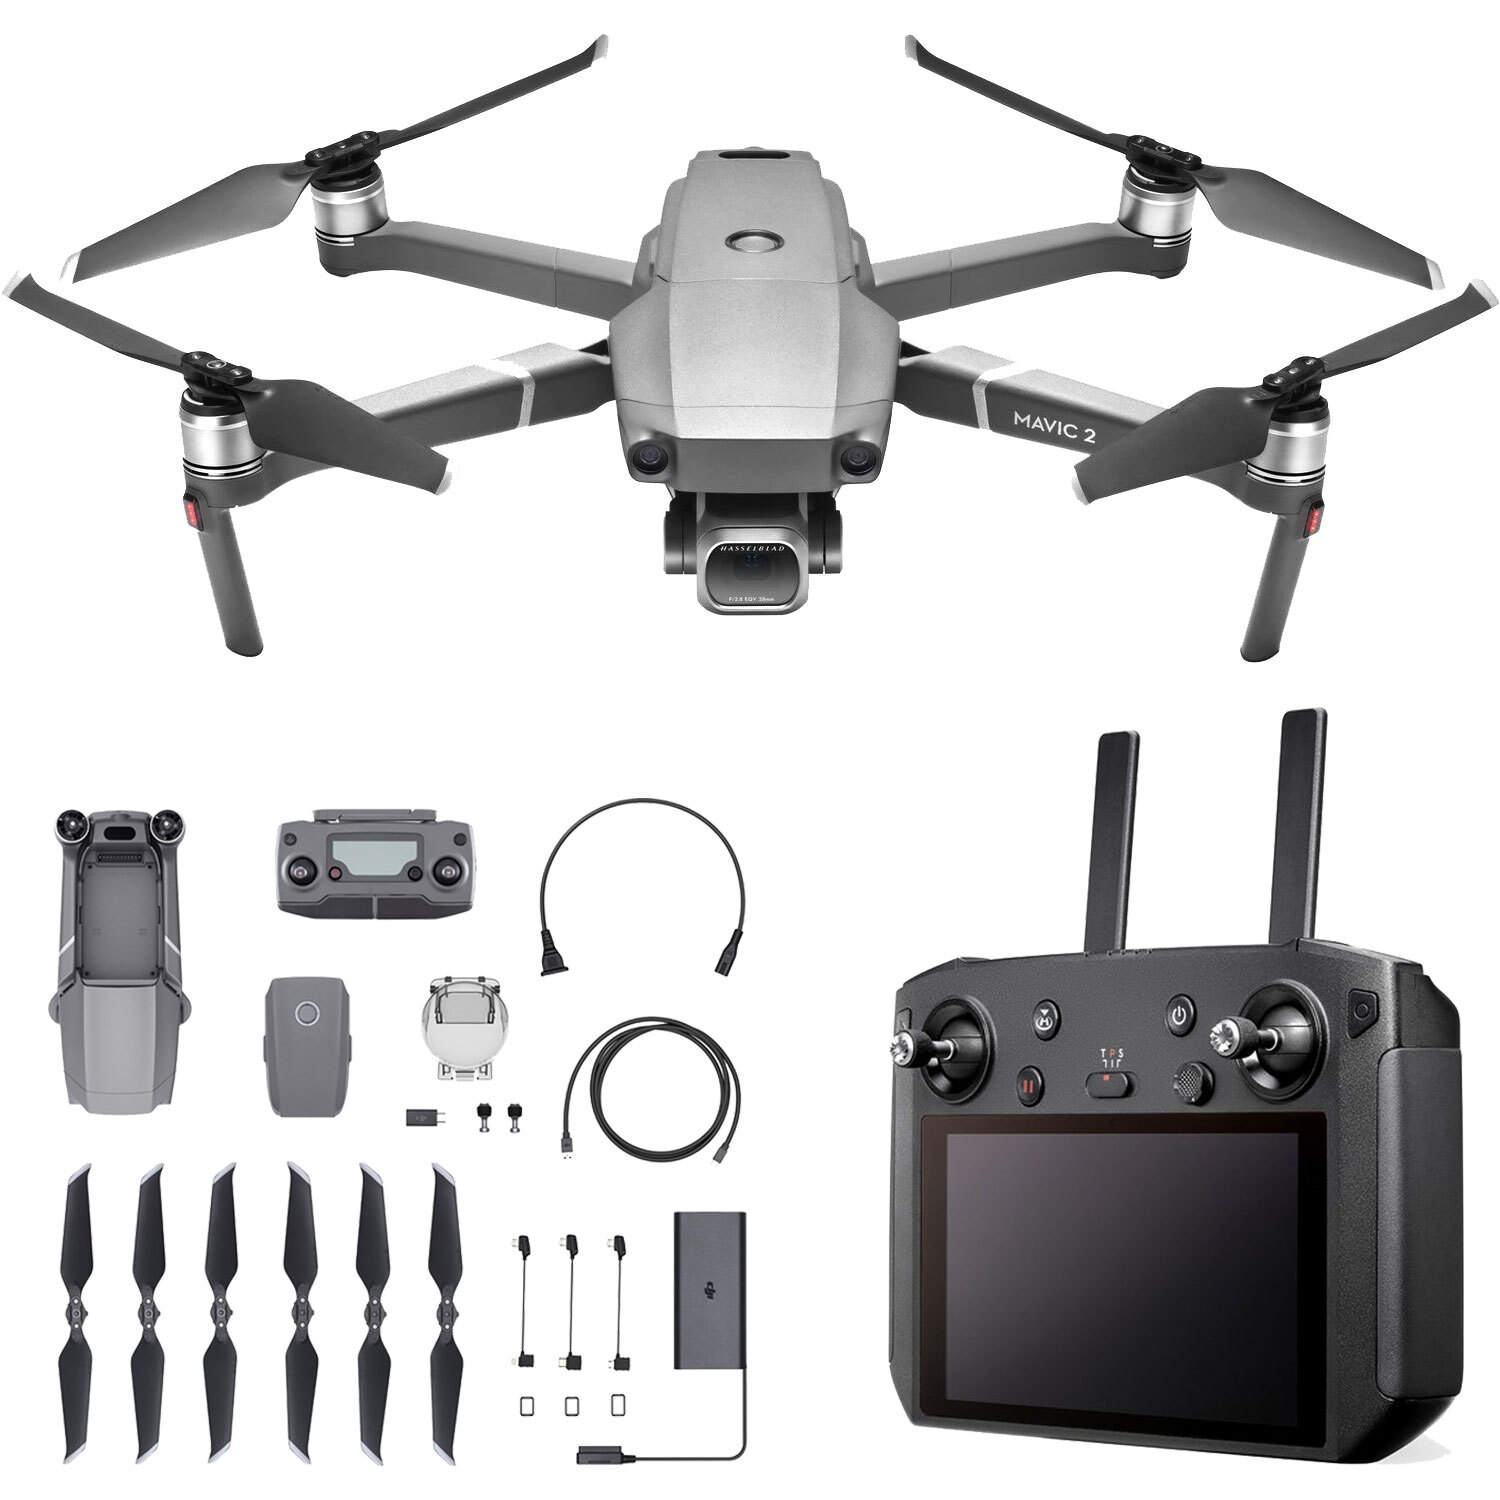 DJI Mavic 2 Pro Drone Quadcopter with Hasselblad Camera and Smart Controller